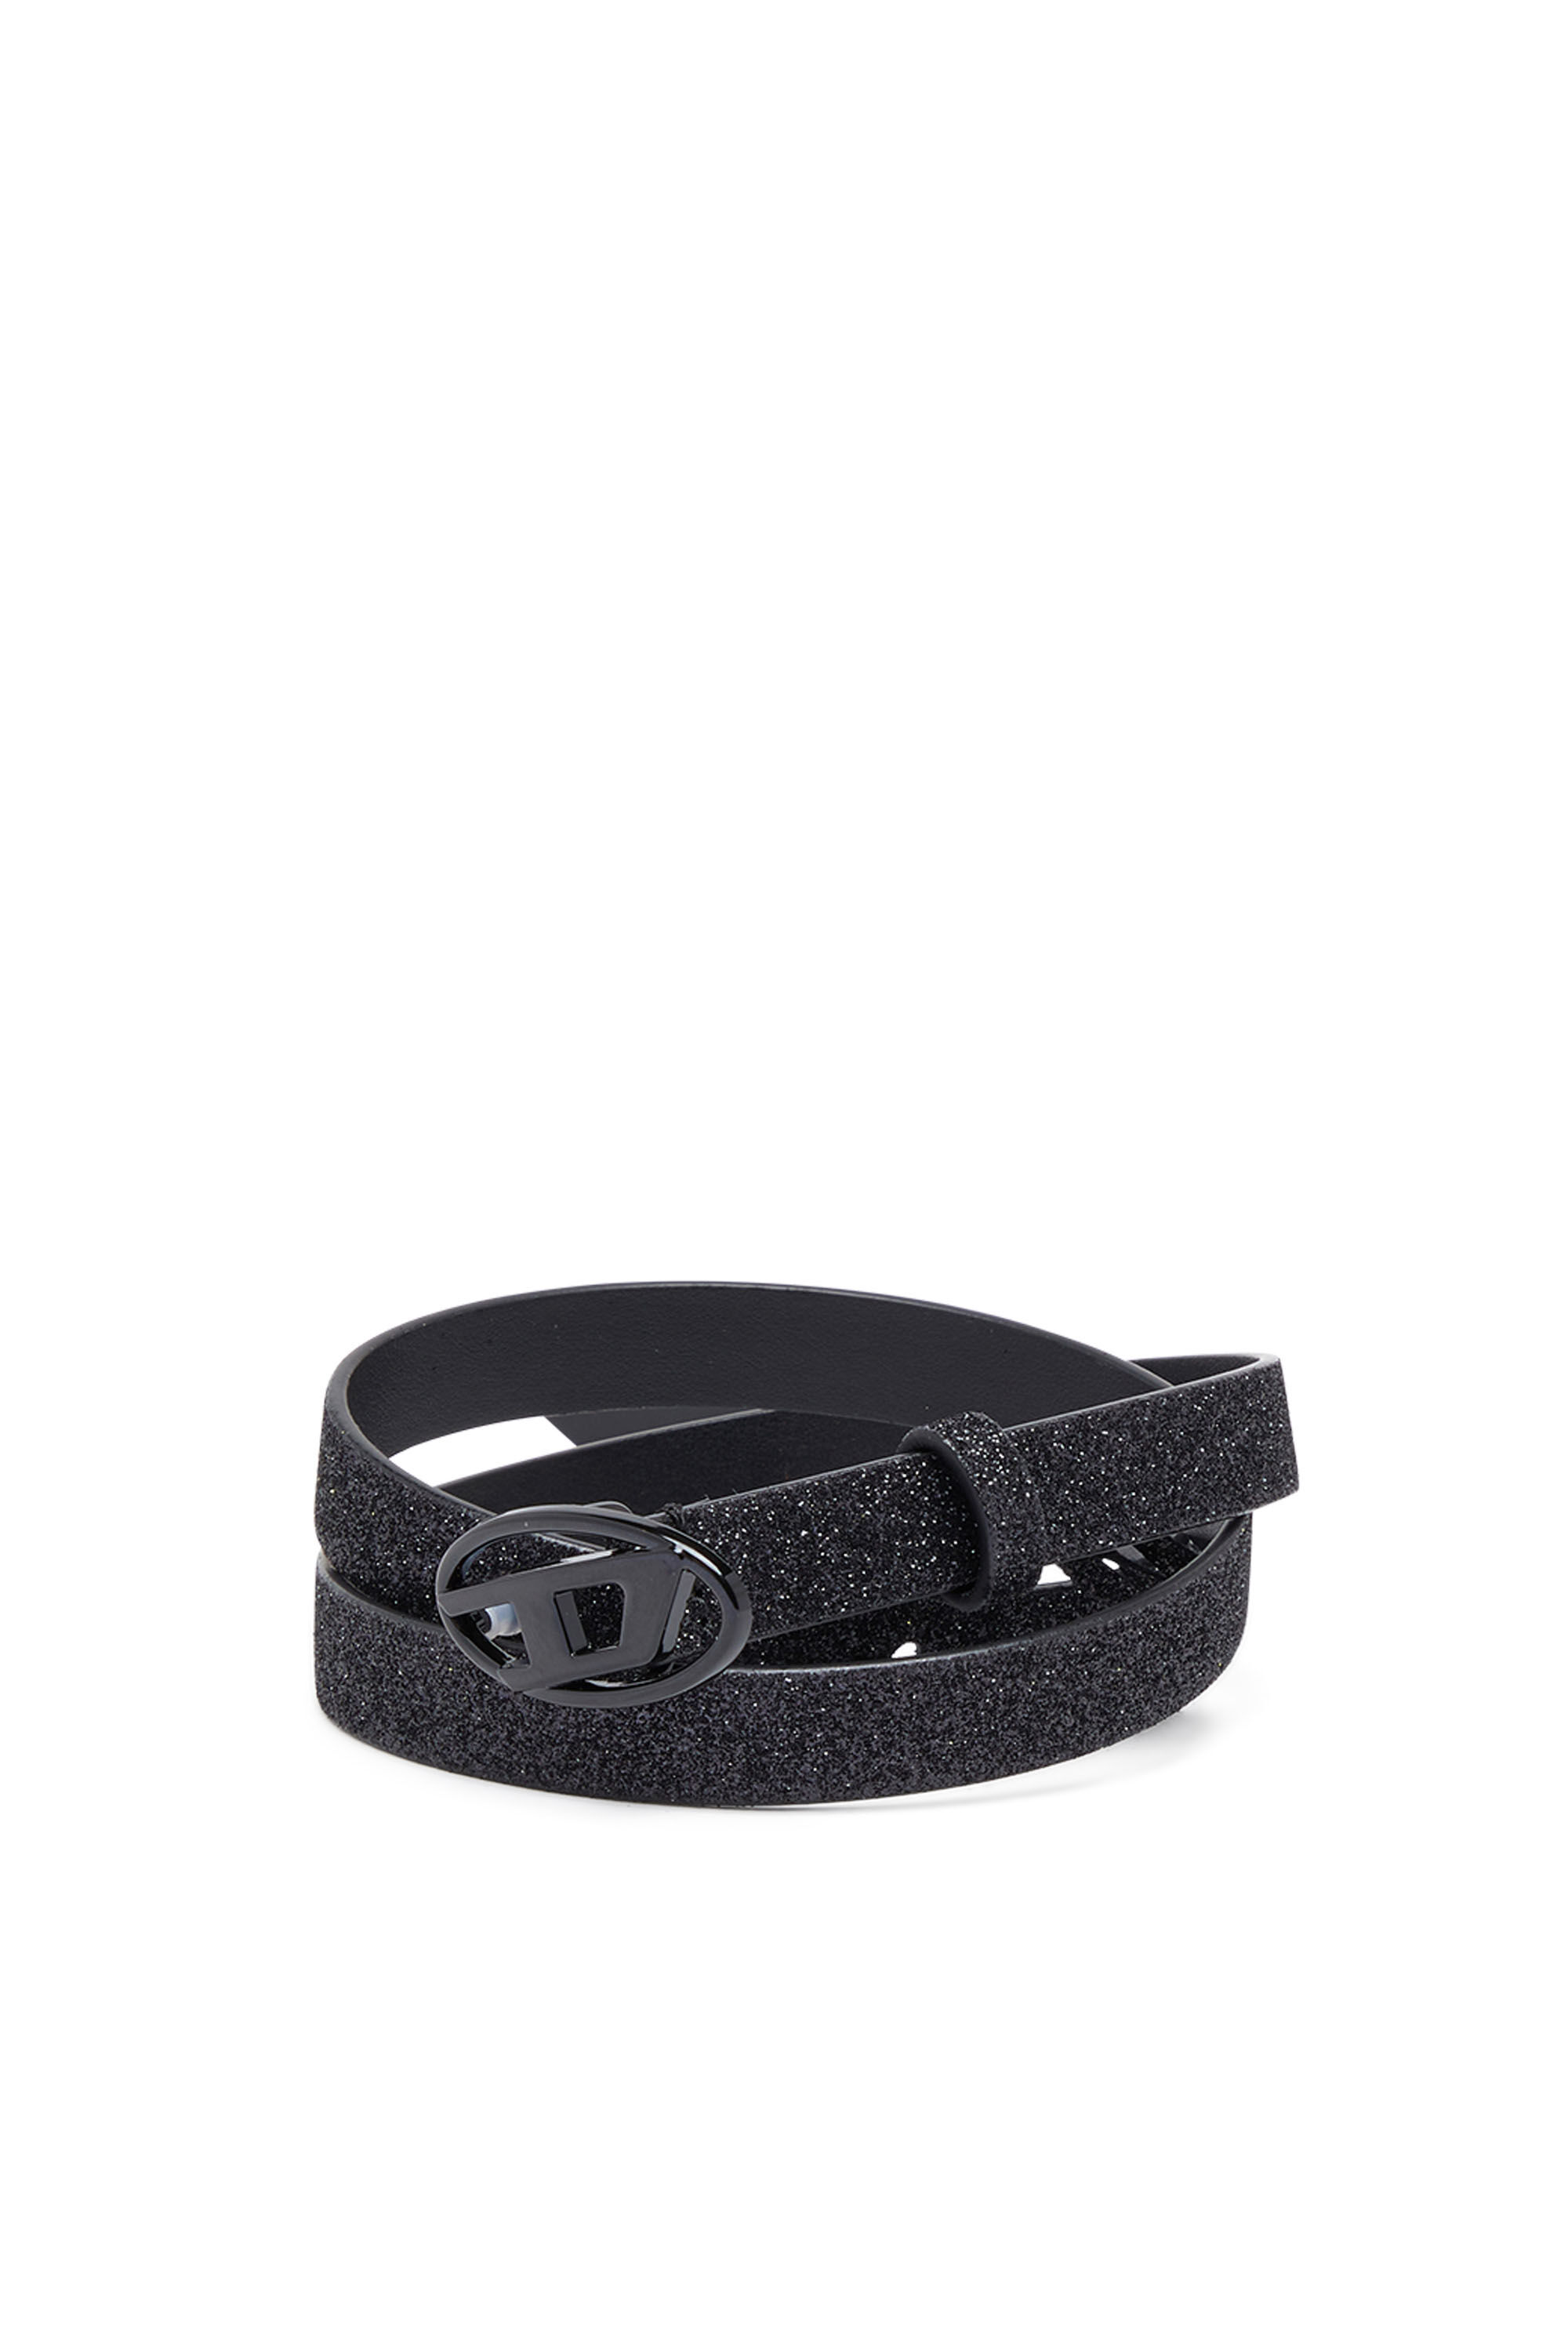 B-1DR 15 Slim glittery belt with Oval D buckle｜ブラック ...